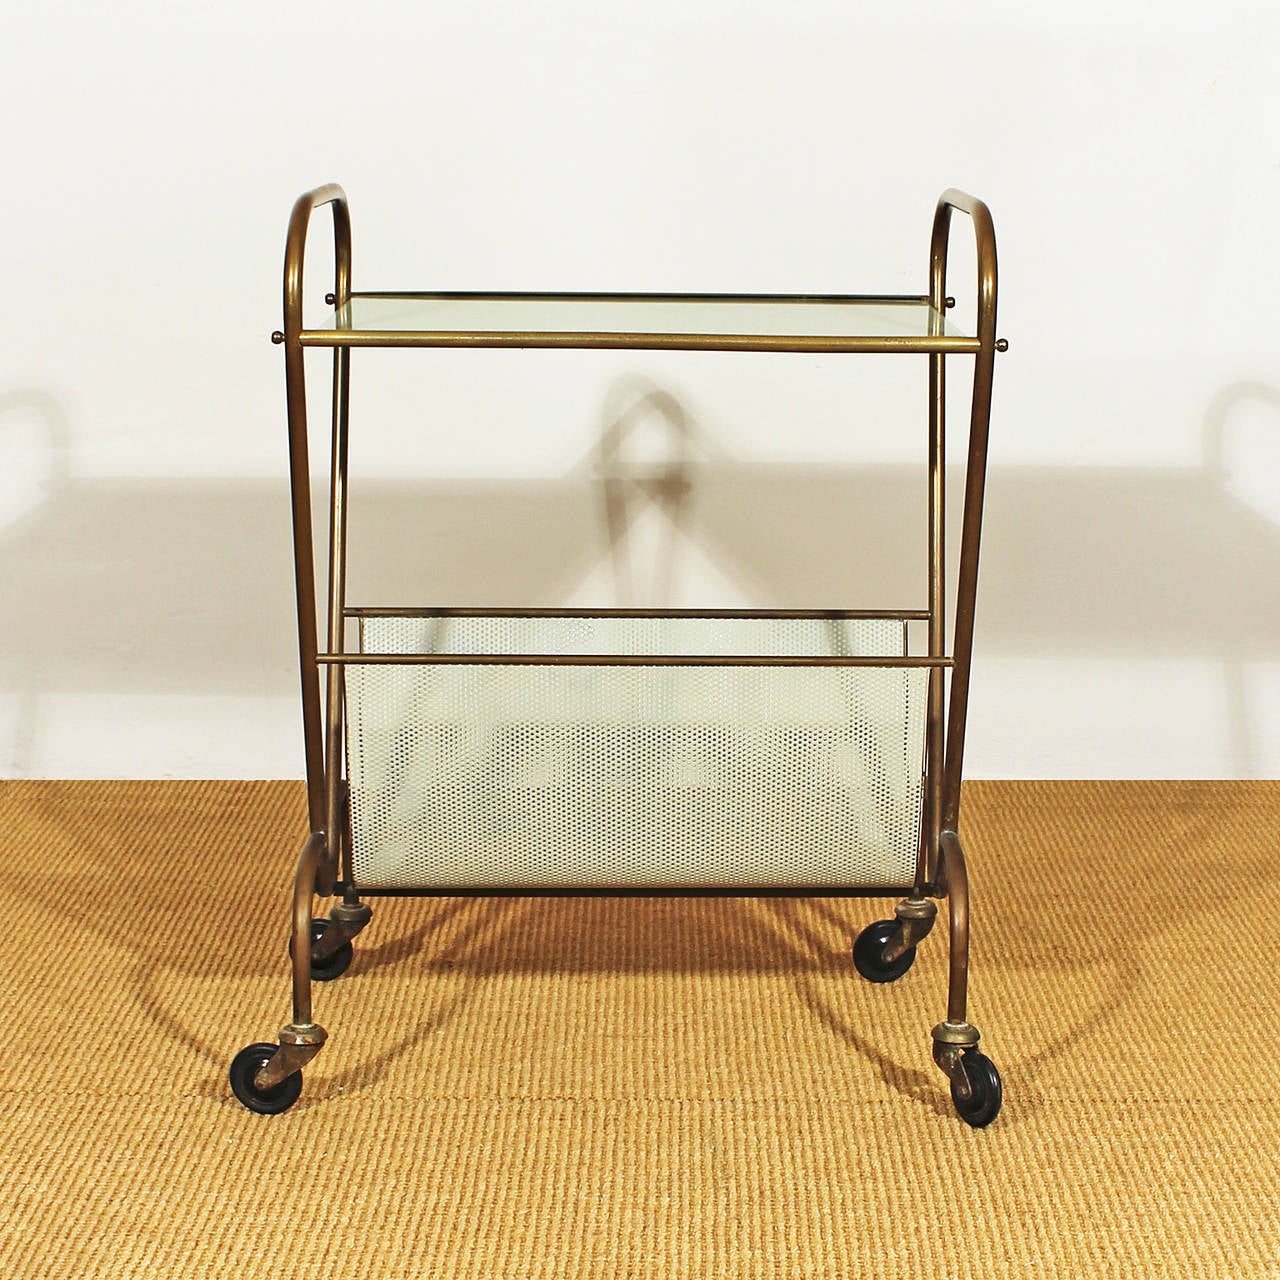 Bar cart and magazine rack, polished brass, white lacquered perforated sheet metal or rigitule, original wheels, coloured glass on top (minor losses).
In the style of Mathieu Matégot.
France circa 1950